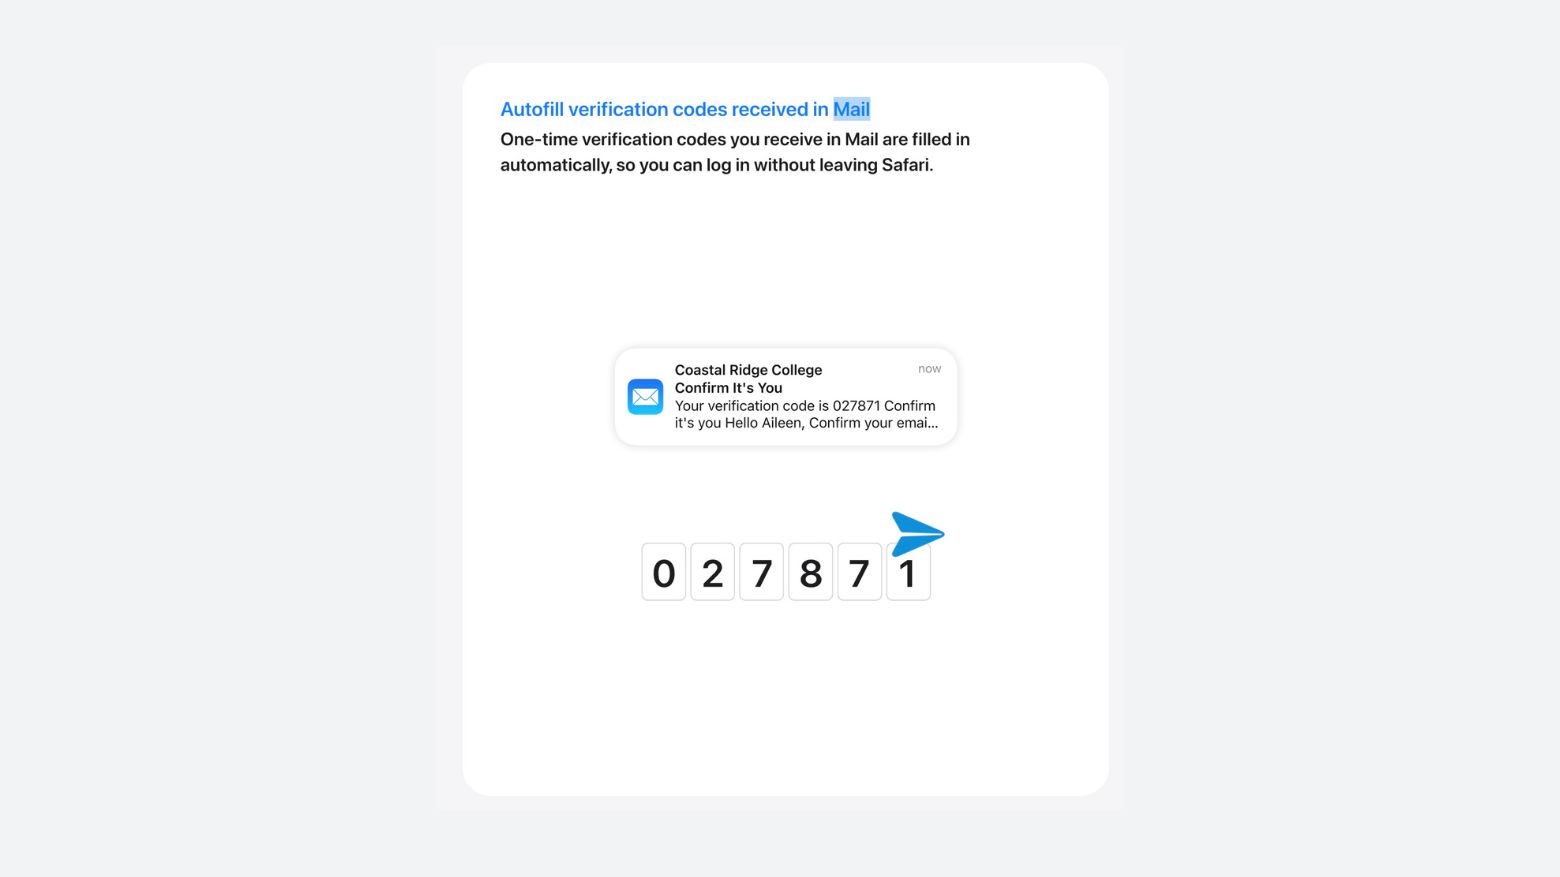 Safari in iOS 17 will autofill verification codes from Mail.